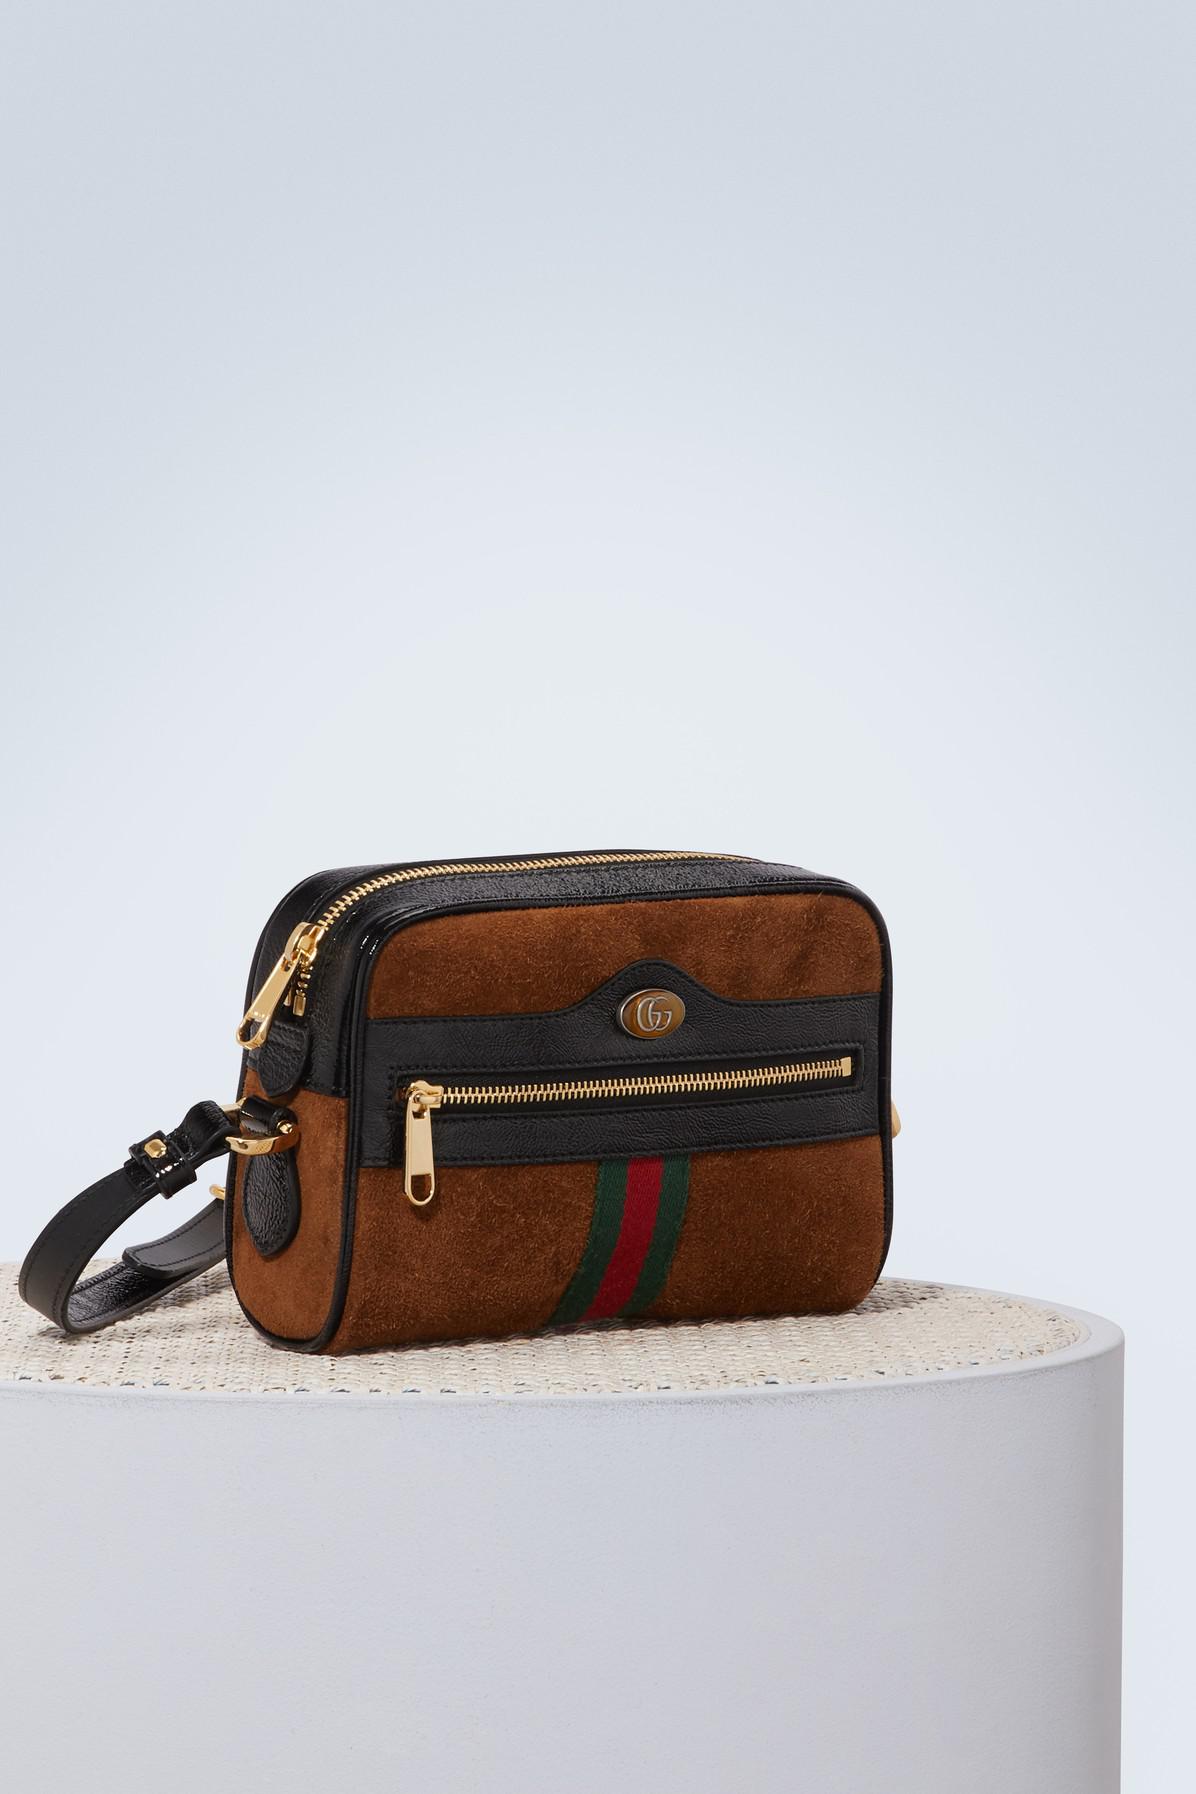 gucci suede ophidia